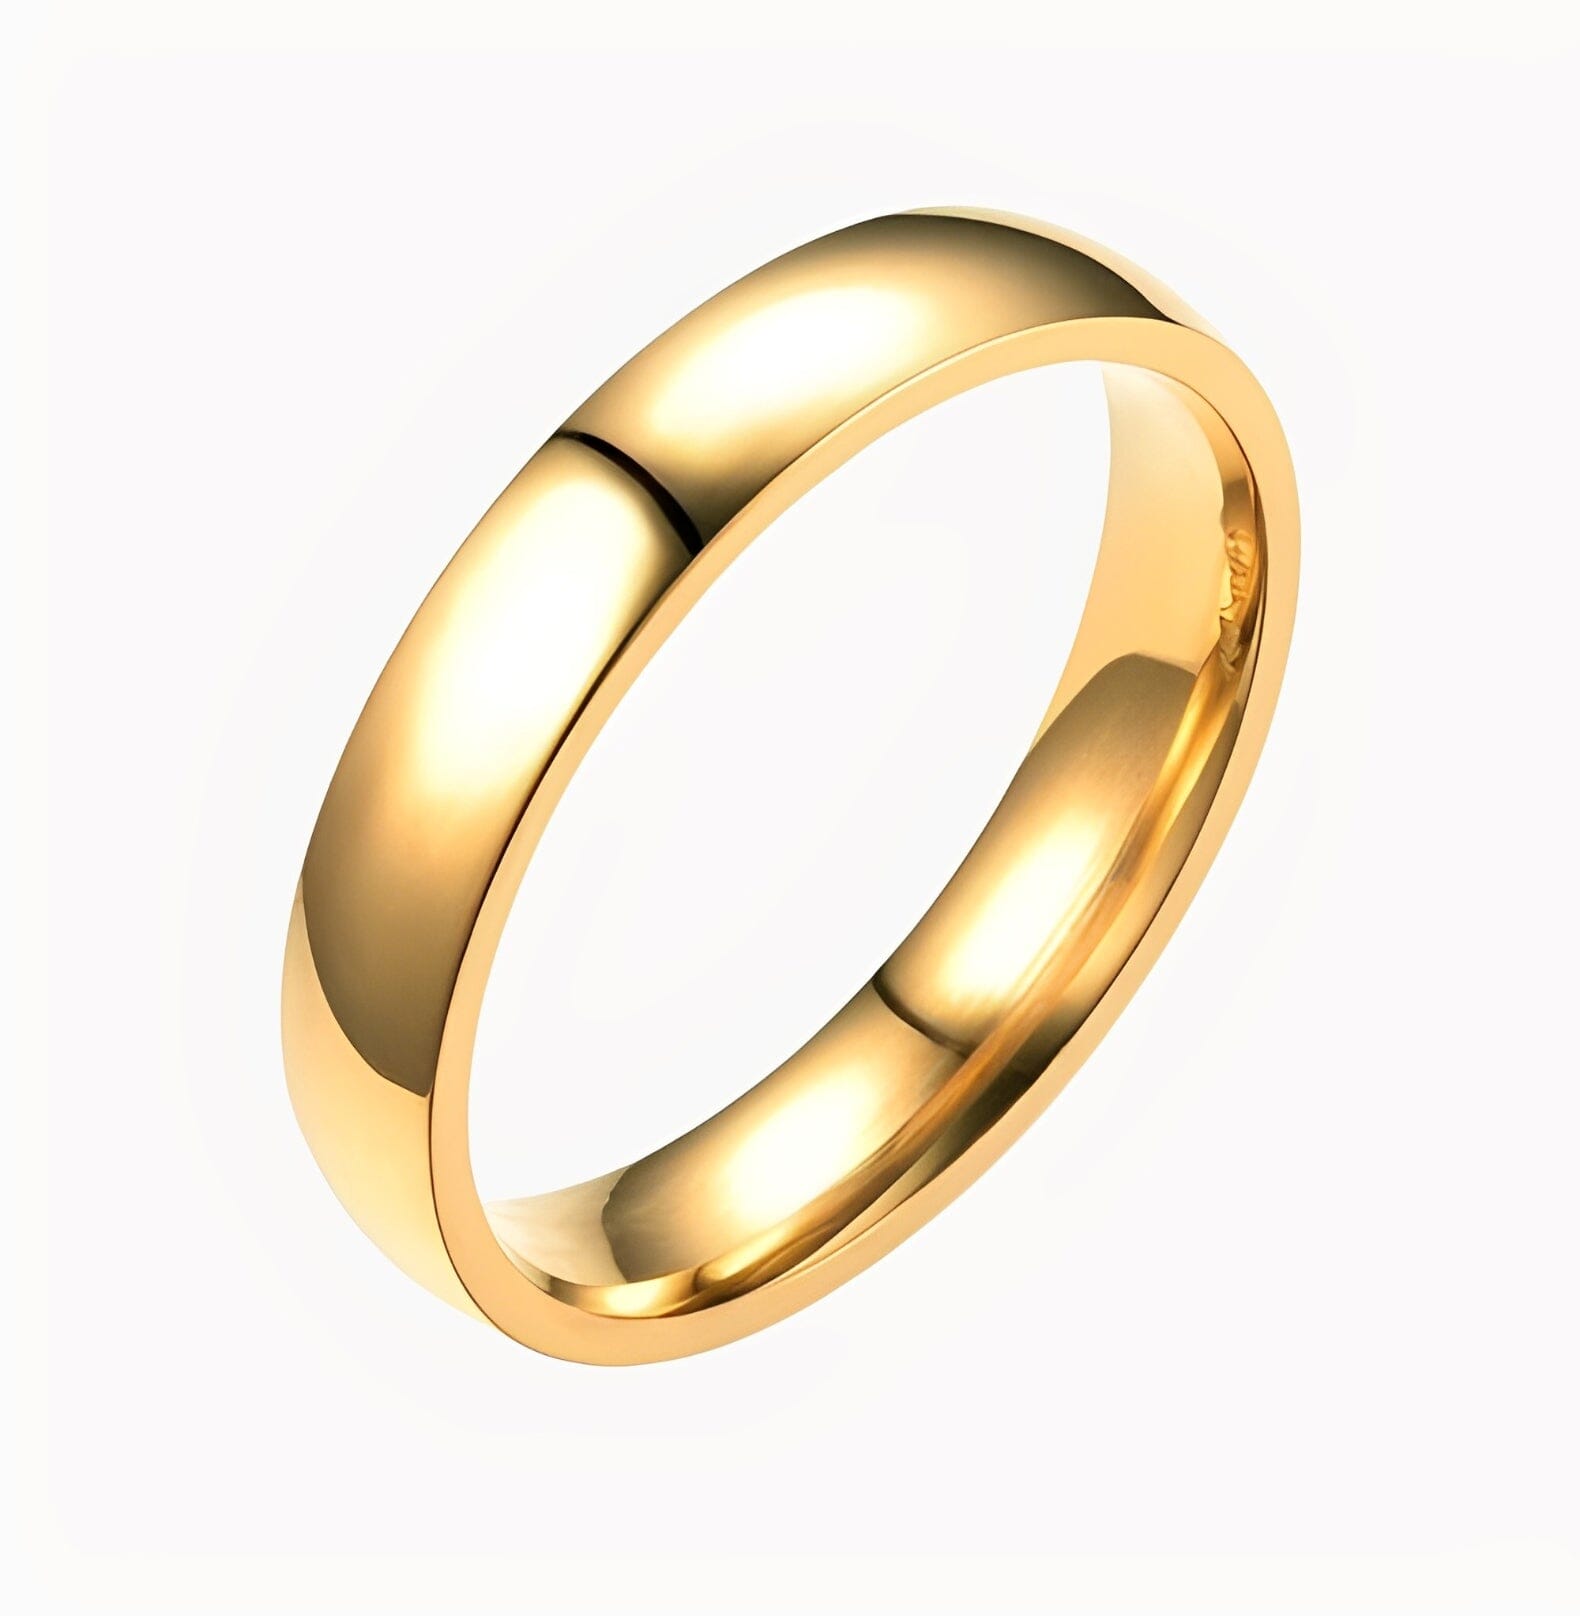 DOME BLOCK RING ring Yubama Jewelry Online Store - The Elegant Designs of Gold and Silver ! 